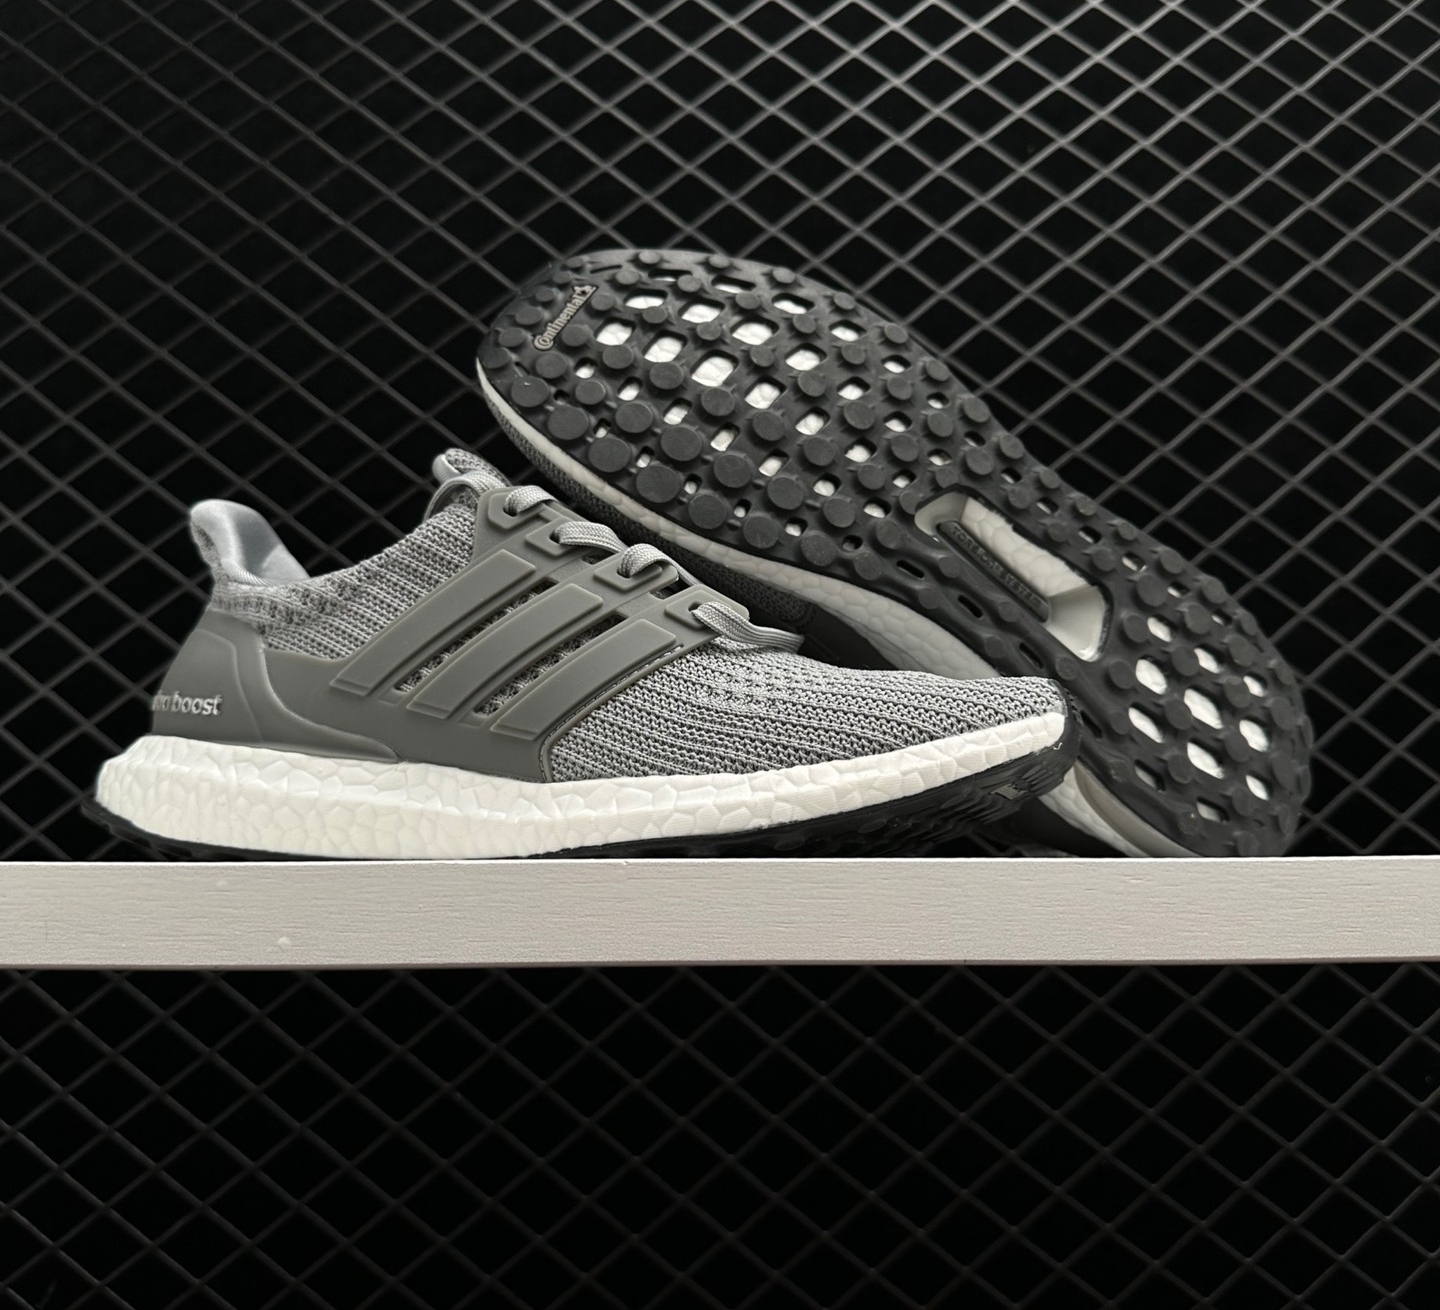 Adidas UltraBoost 4.0 'Grey' BB6150 - The Ultimate Athletic Sneaker